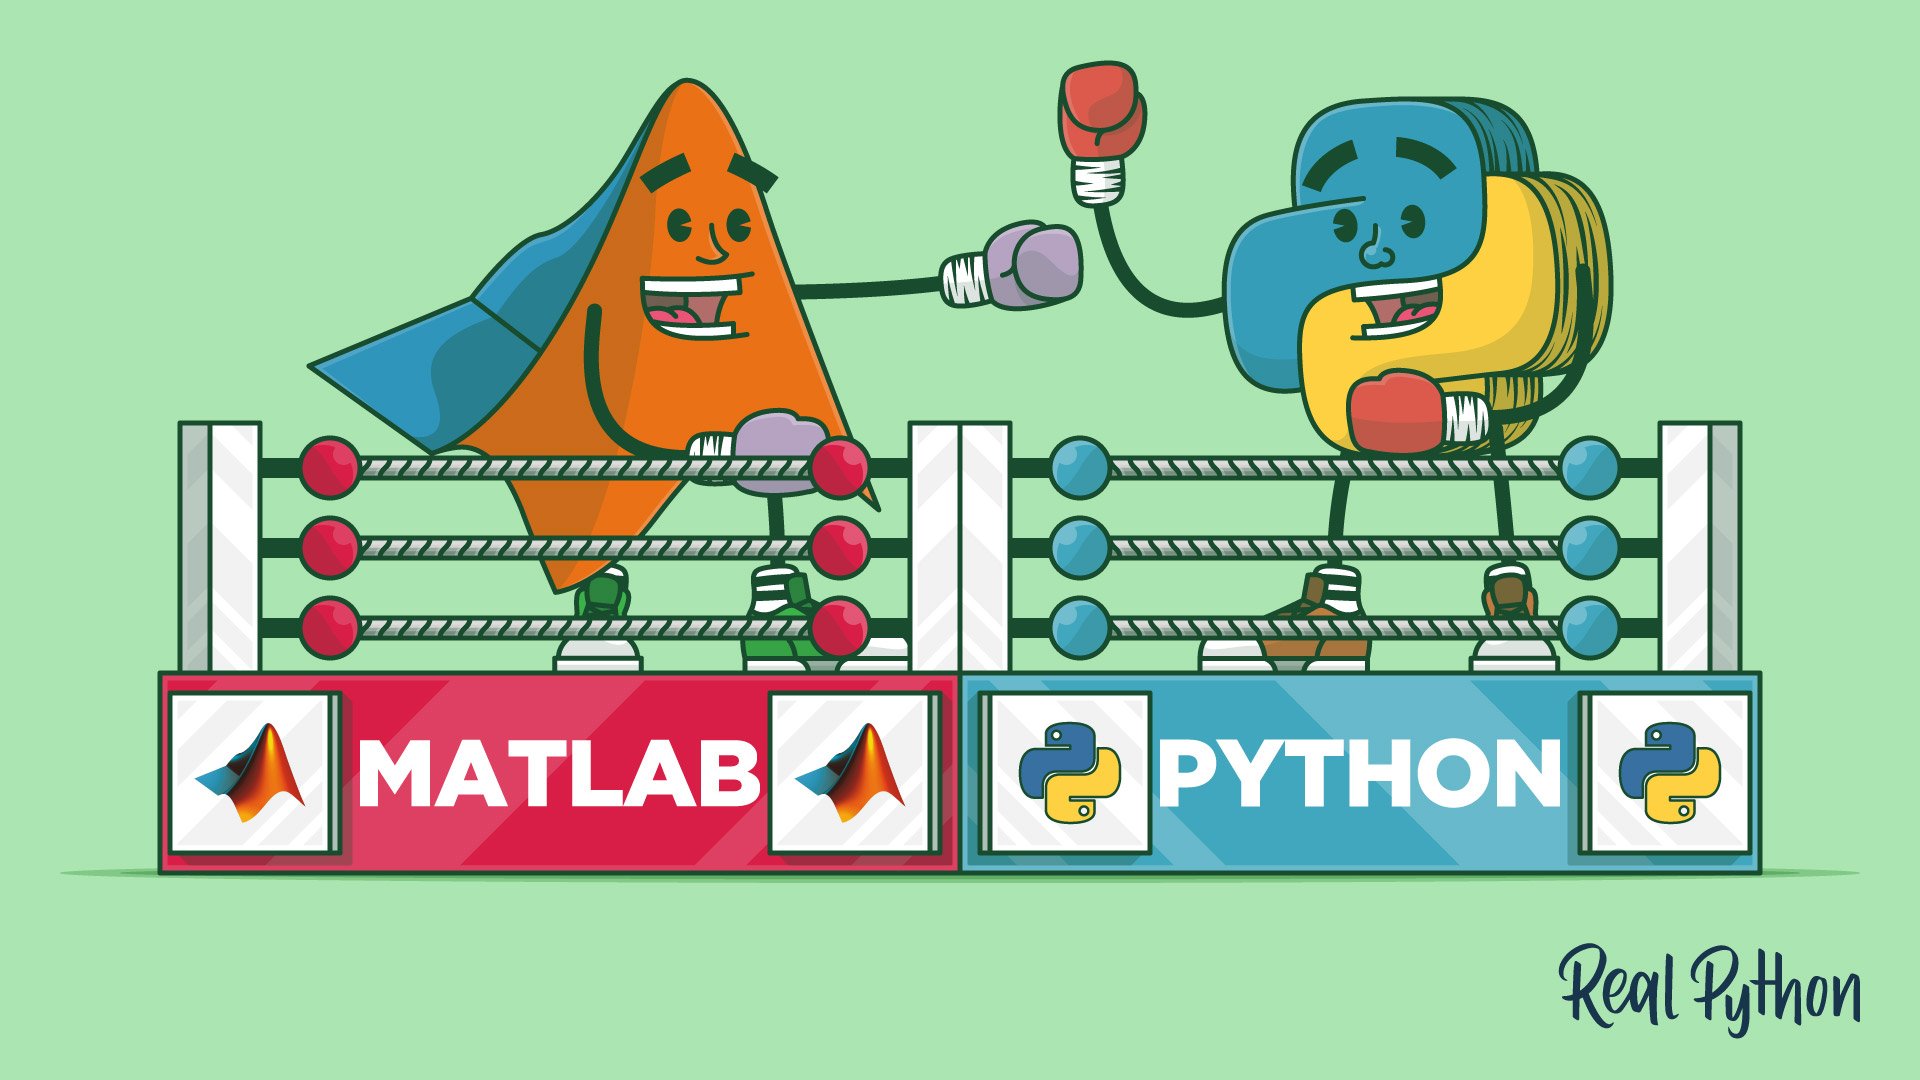 MATLAB vs Python: Why and How to Make the Switch